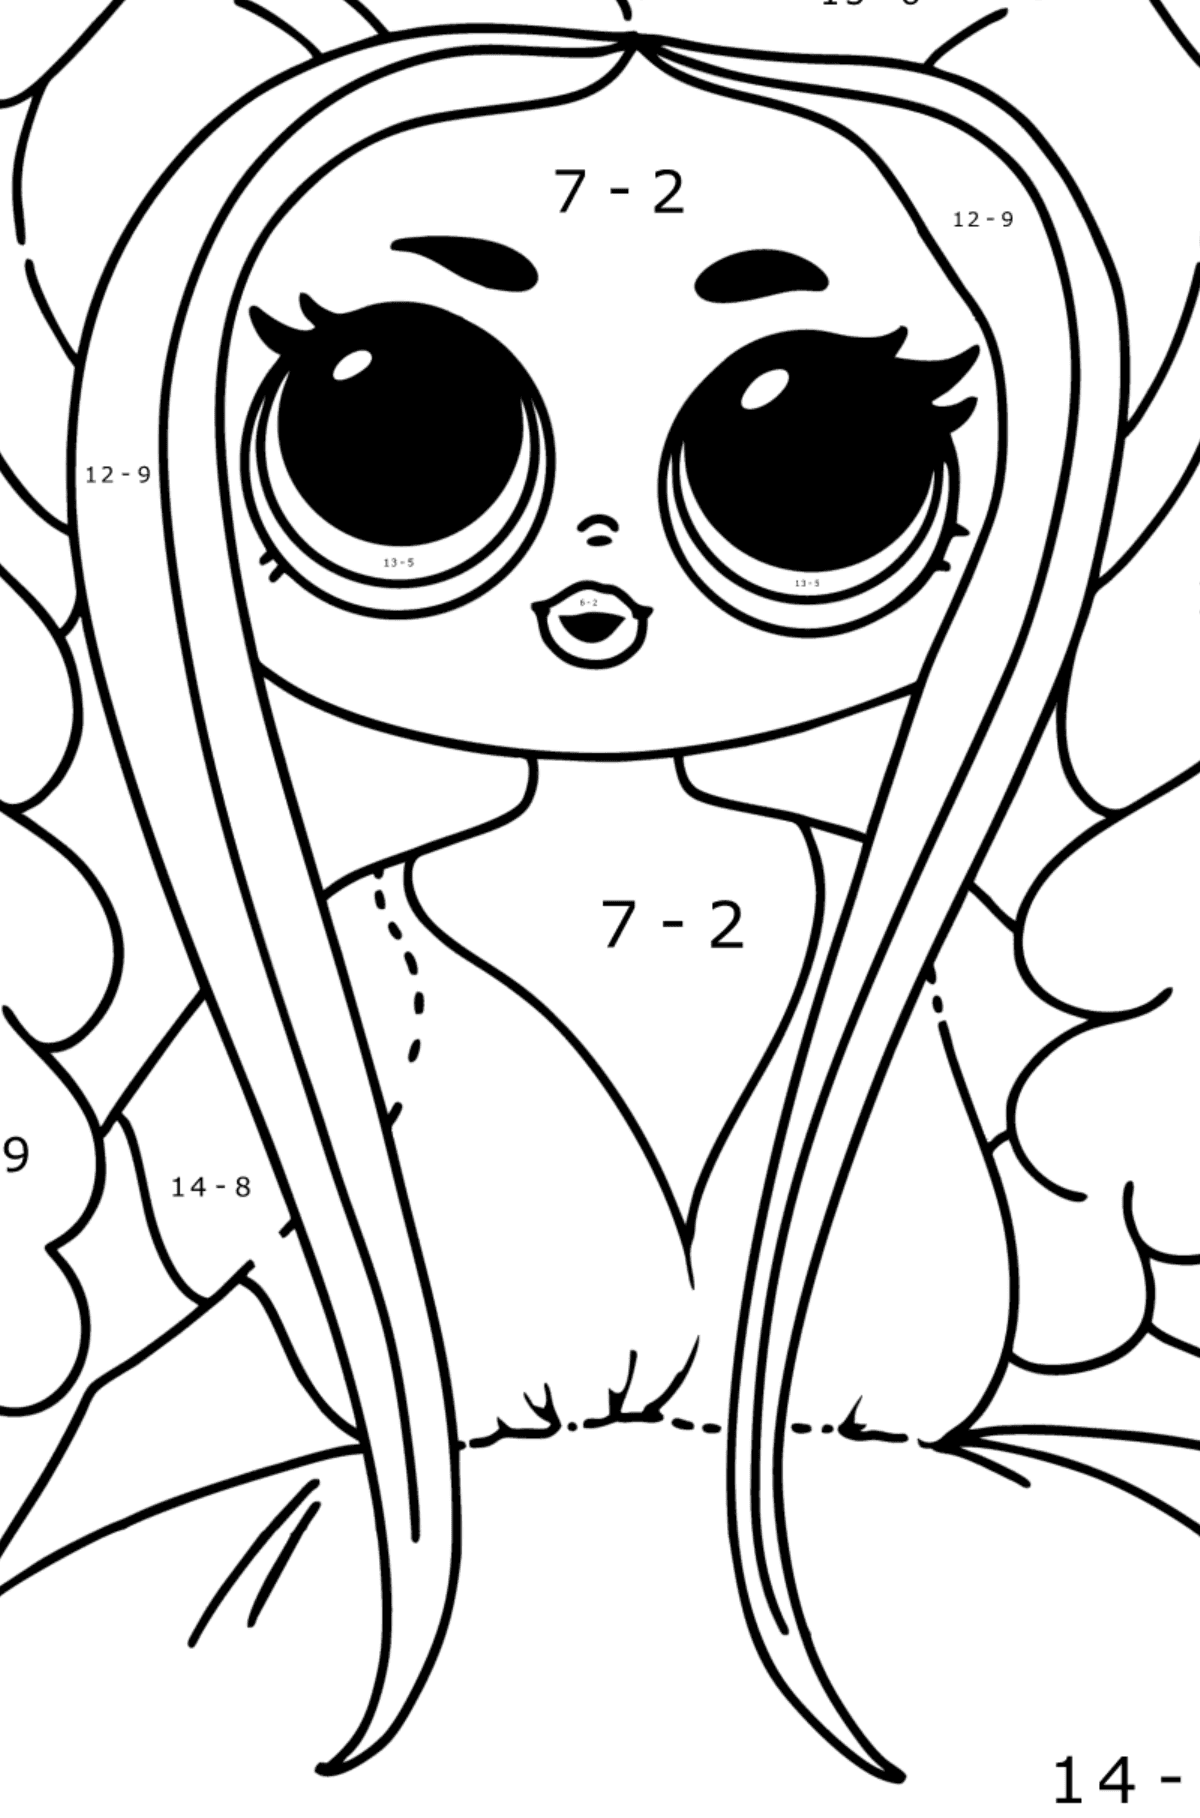 Coloring page LOL OMG Honeylicious Doll - Math Coloring - Subtraction for Kids